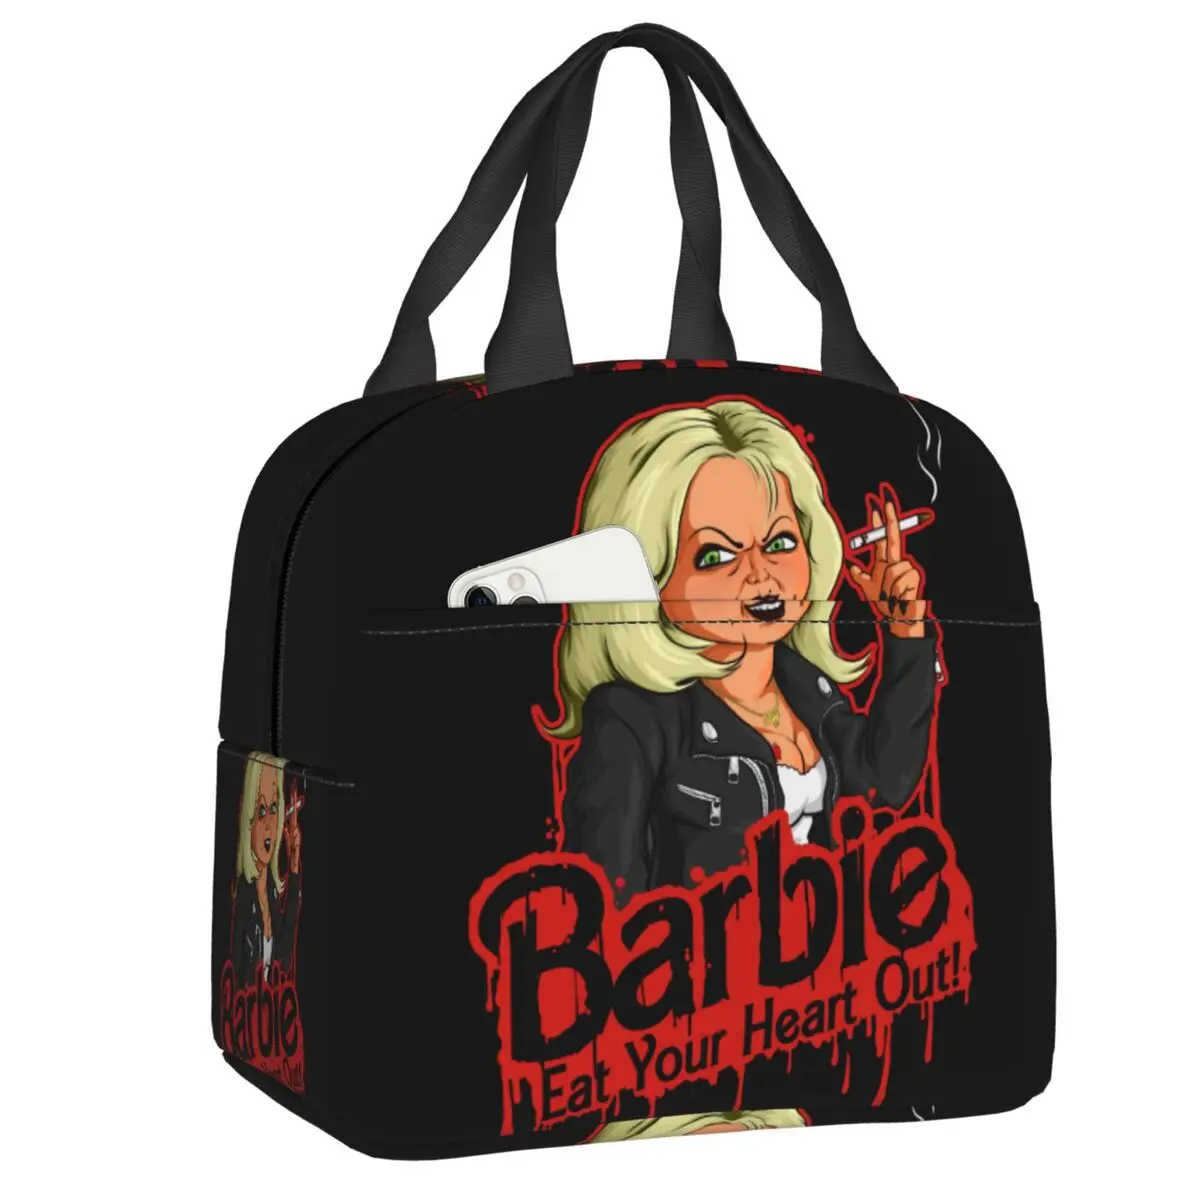 

Bride Of Chucky Lunch Box for Women Leakproof Scary Tiffany Cooler Thermal Insulated Lunch Bag Office Work Picnic Food Bags